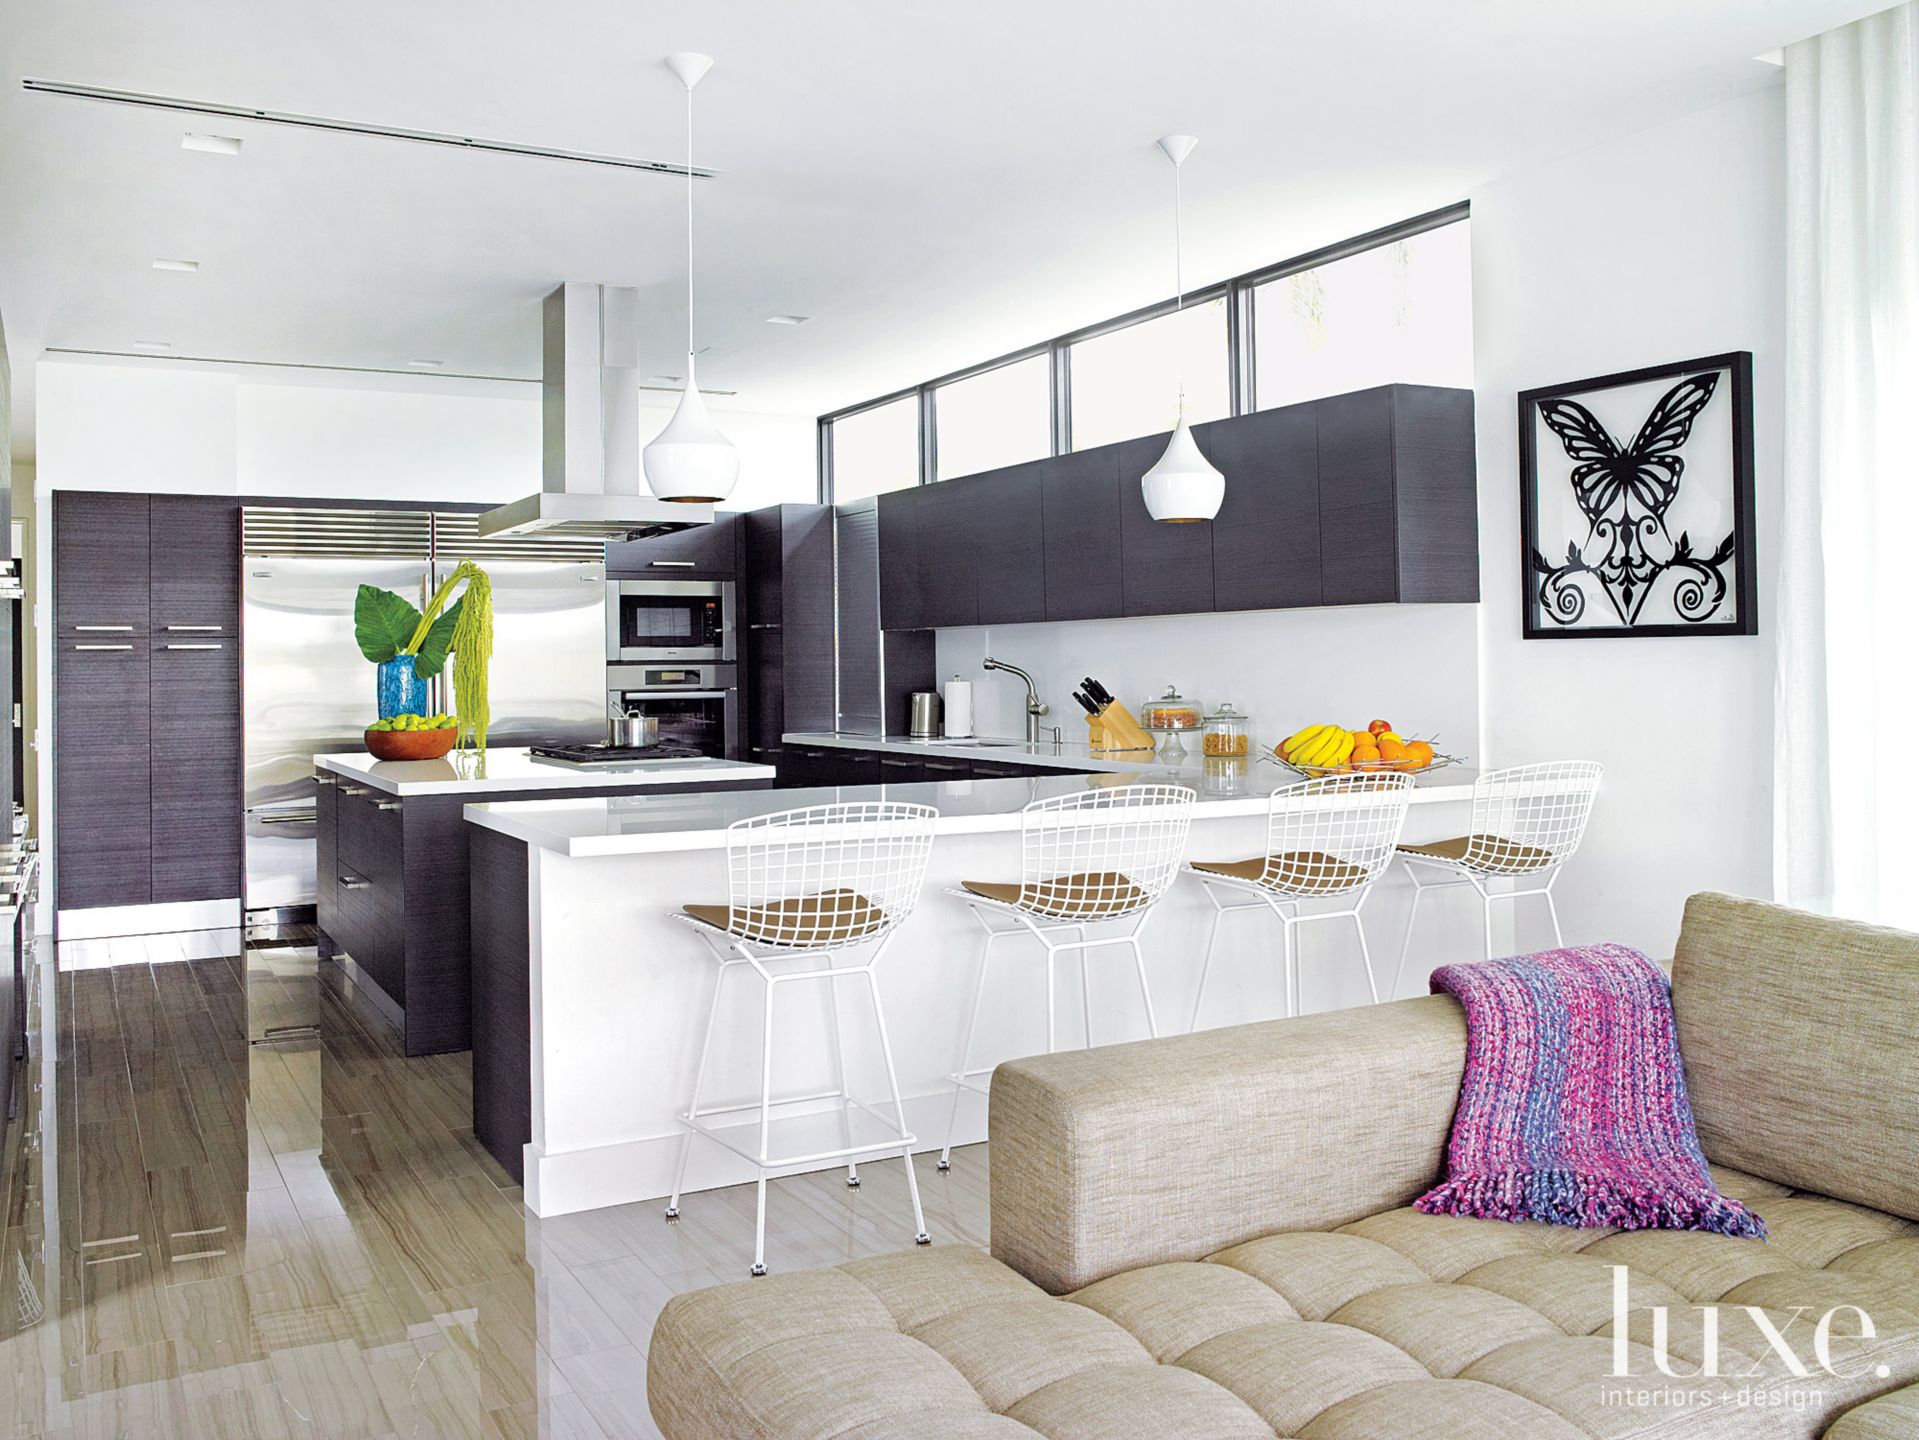 all black and white cabinets with white barstools